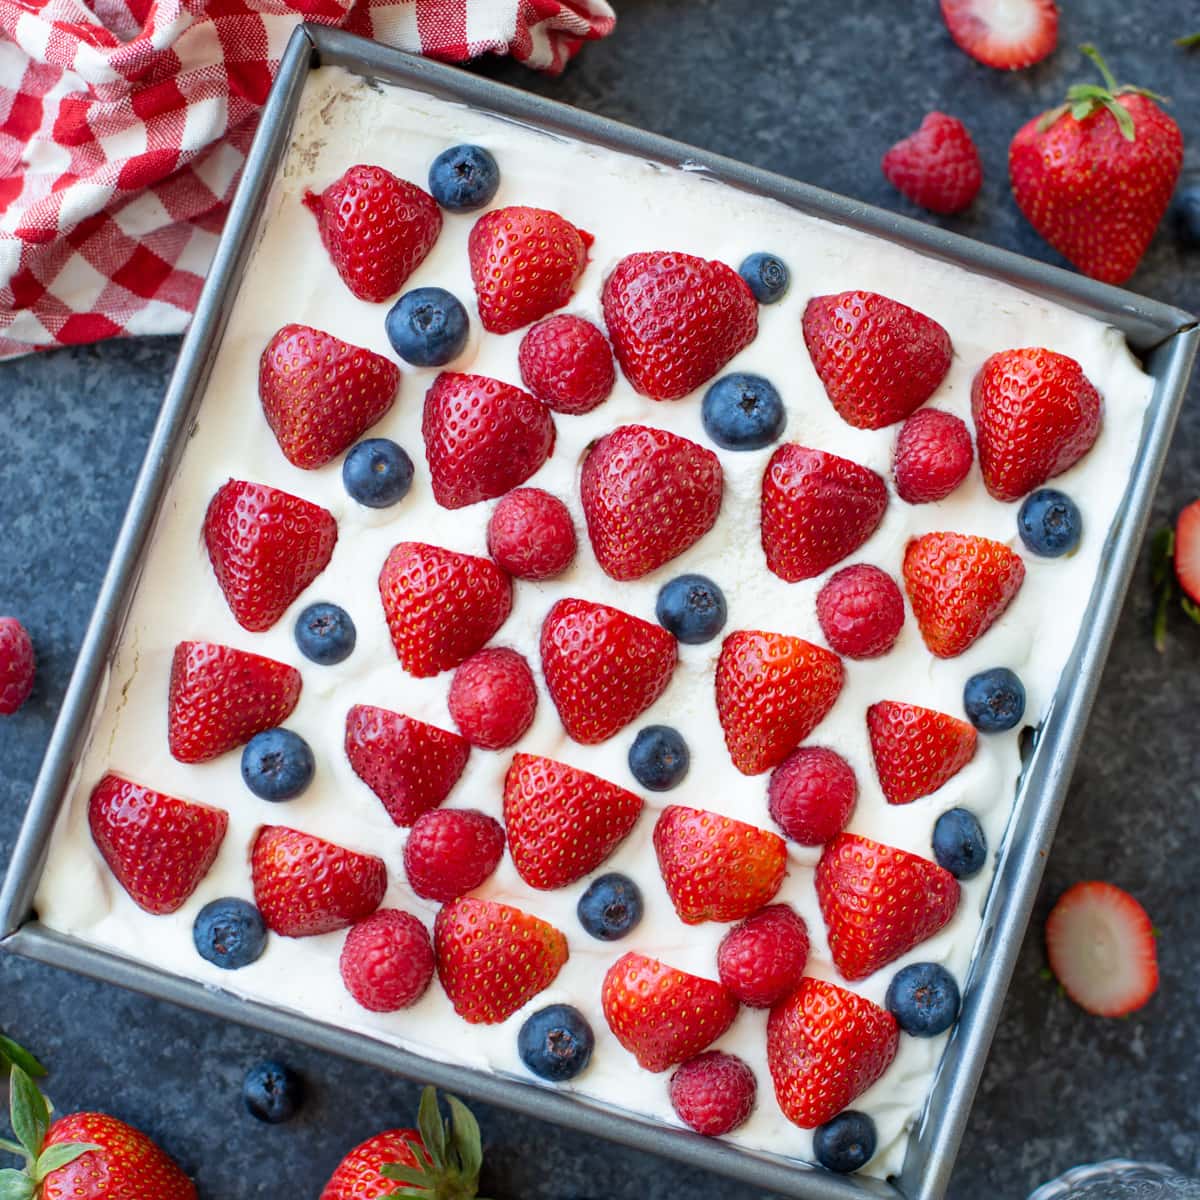 Strawberry icebox cake topped with fresh berries.